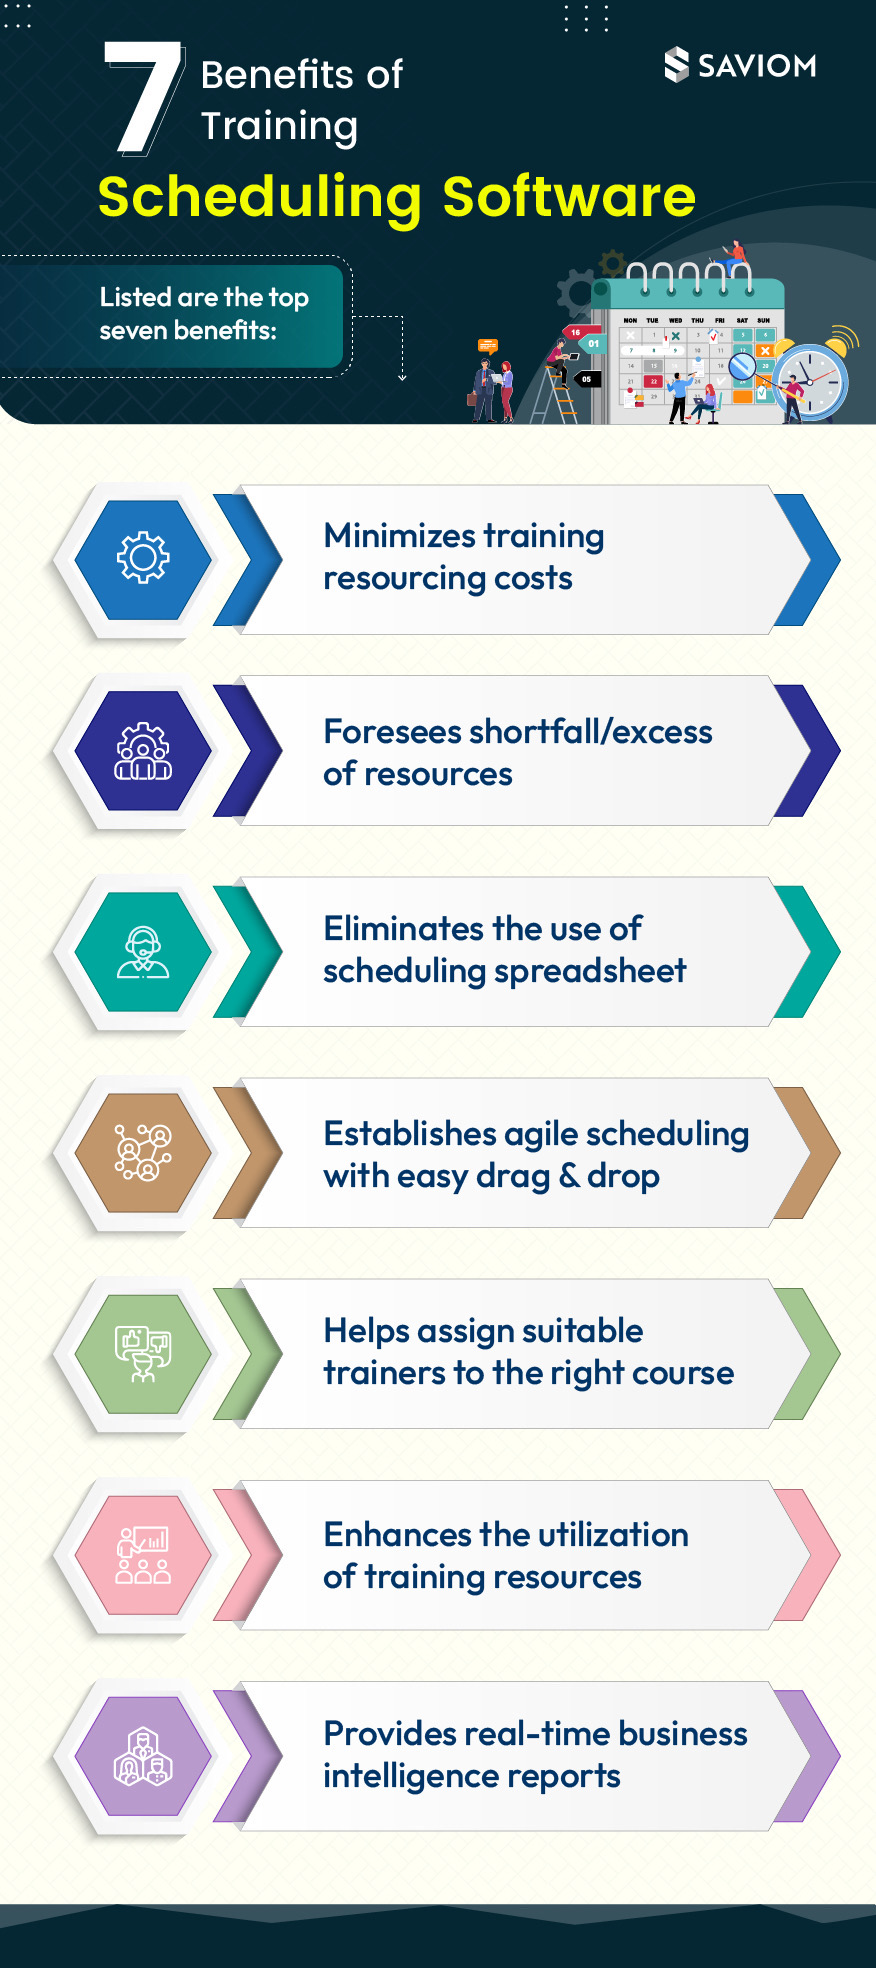 7 Benefits of Training Scheduling Software (2)